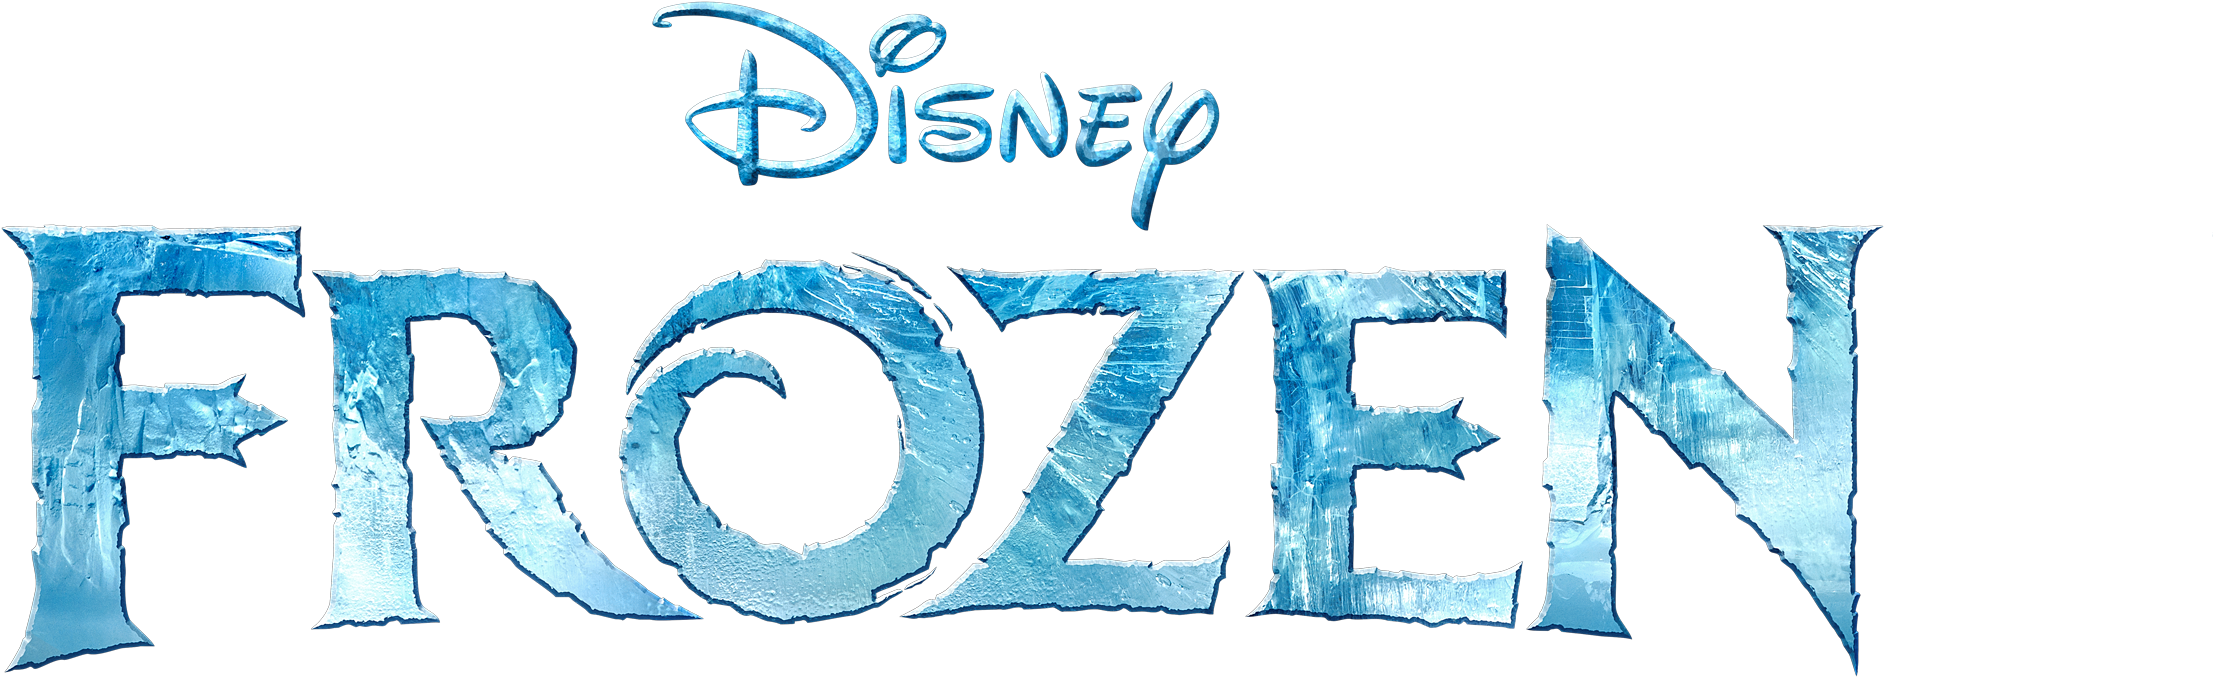 Free Disney Frozen Logo Transparent Download Free Disney Frozen Logo Transparent Png Images Free Cliparts On Clipart Library